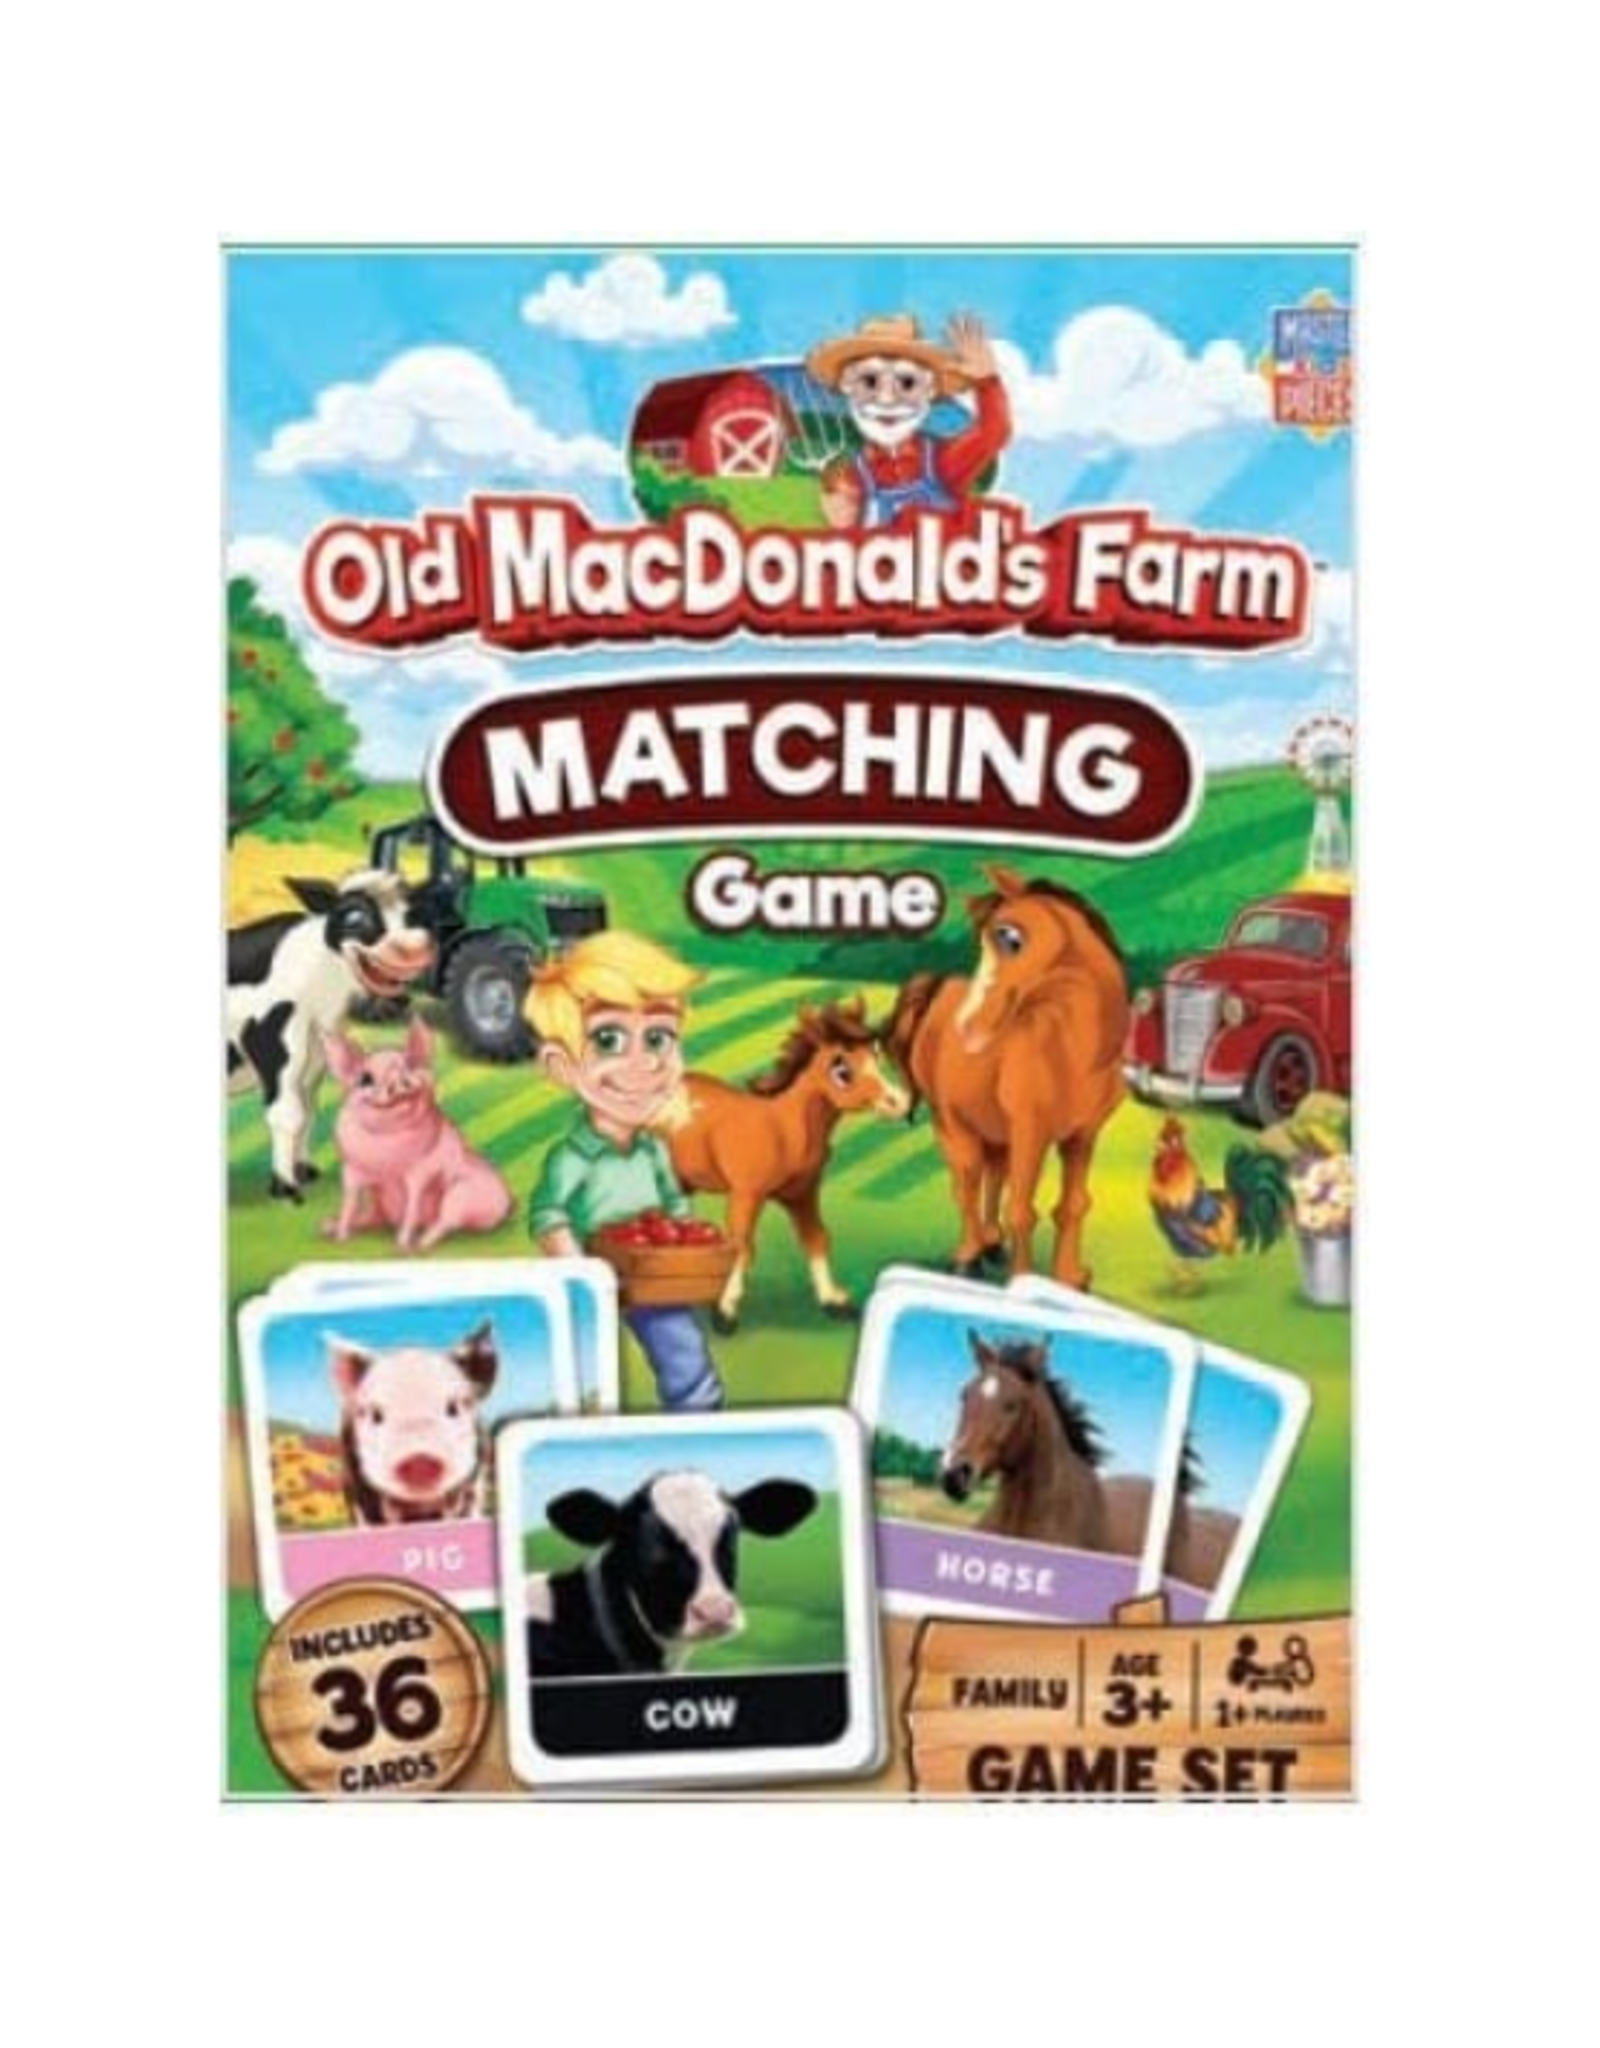 MasterPieces MasterPieces - Old Macdonald's Farm Matching Game